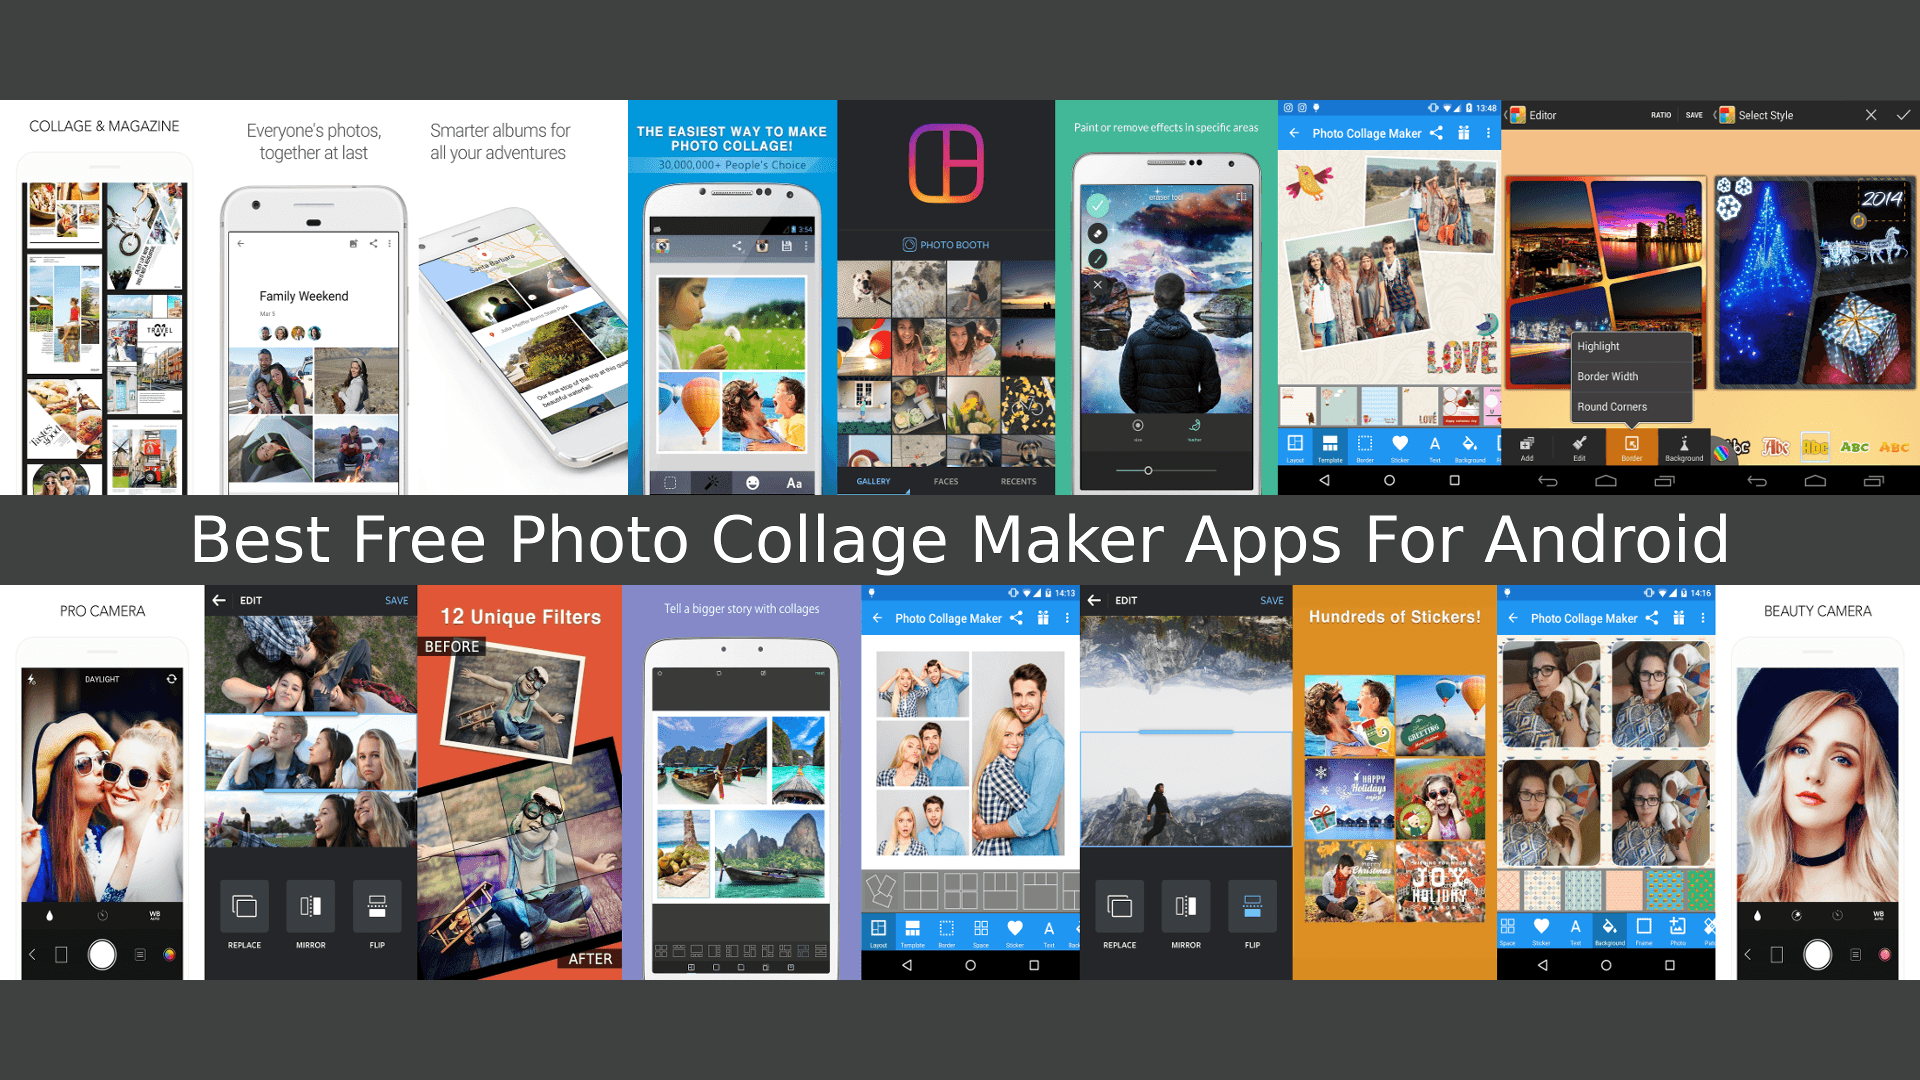 Android Photo Collage Apps